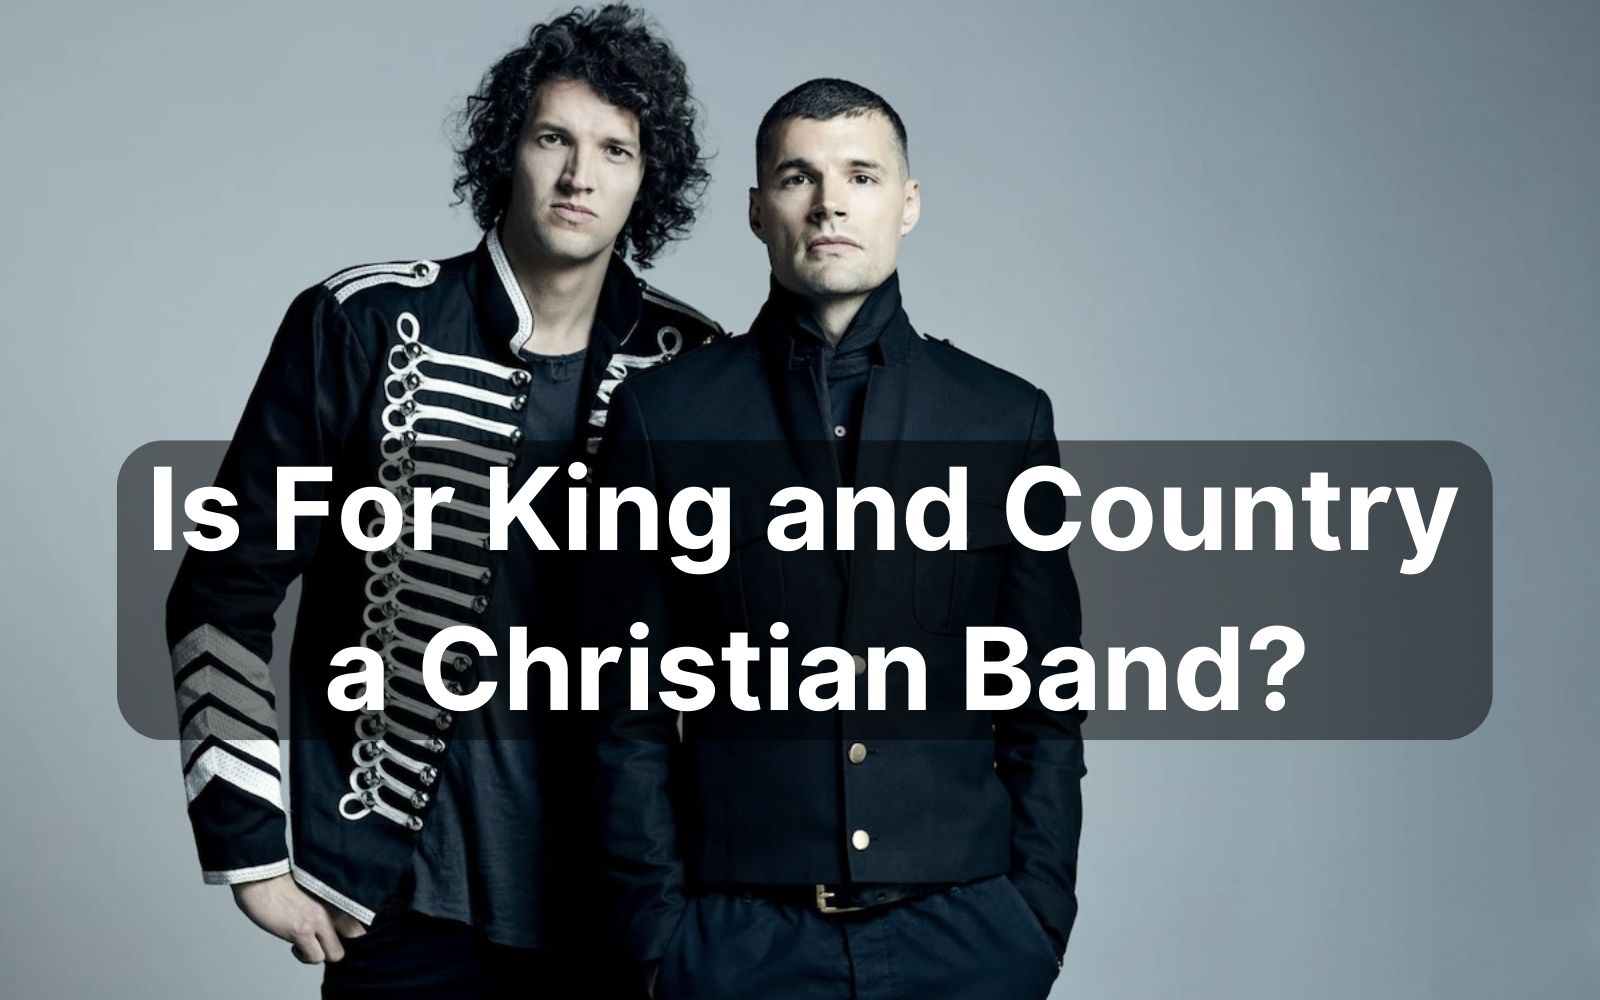 Is For King and Country a Christian Band.